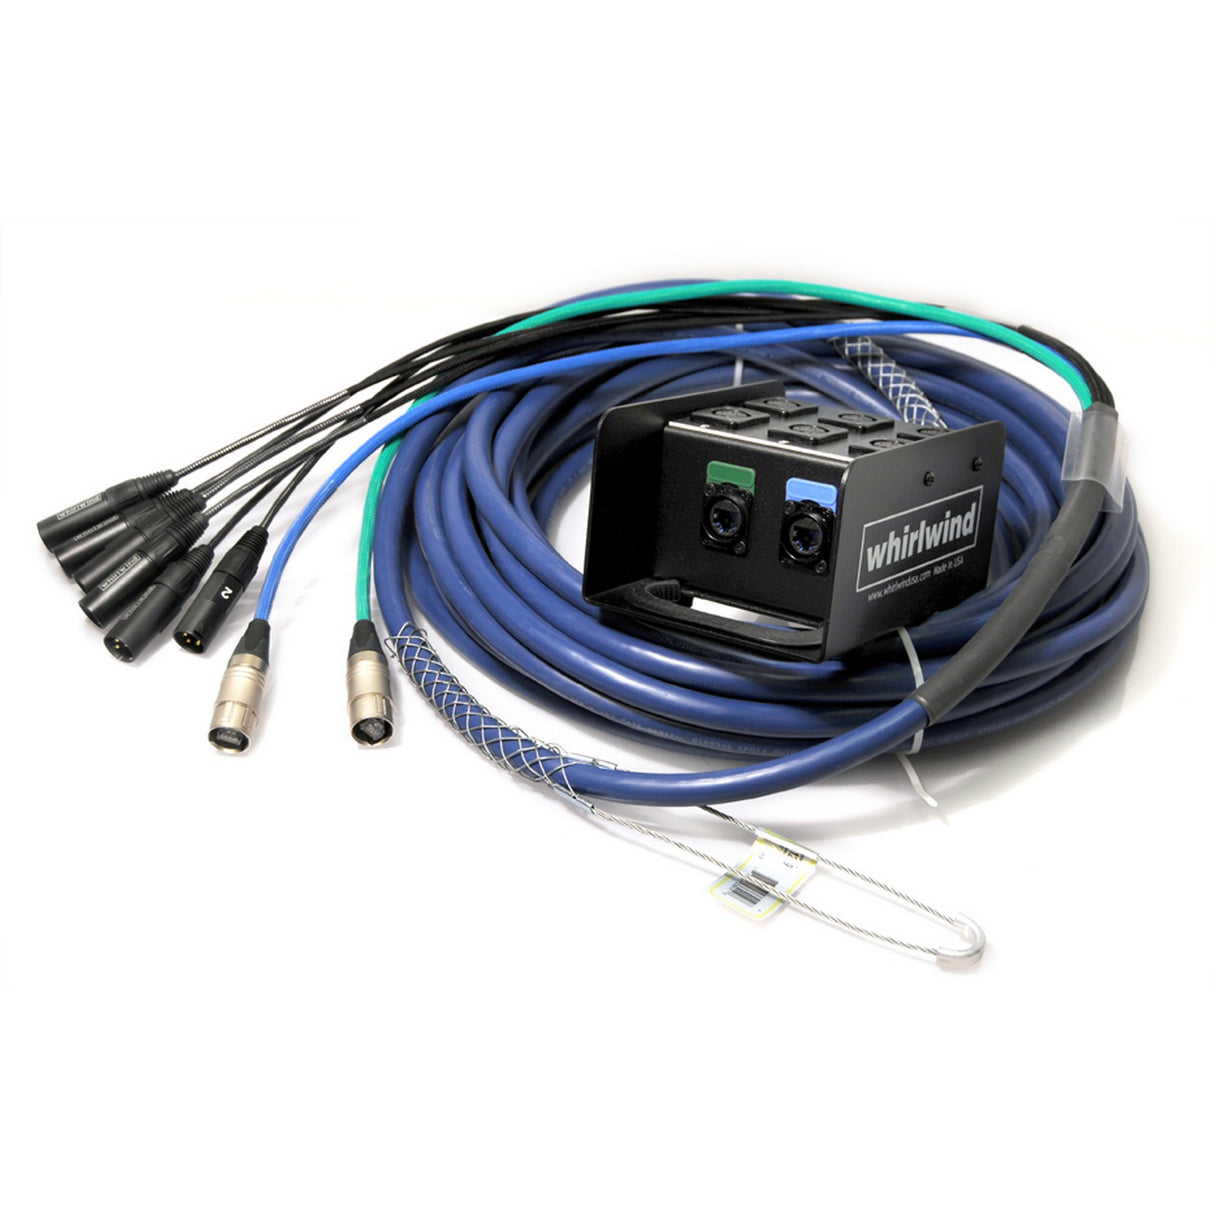 Whirlwind MD-6-2-C6-200 MEDUSA 6 XLR Inputs 2 CAT6 Lines with CAT5e Ethercon Snake Cable, 200-Feet